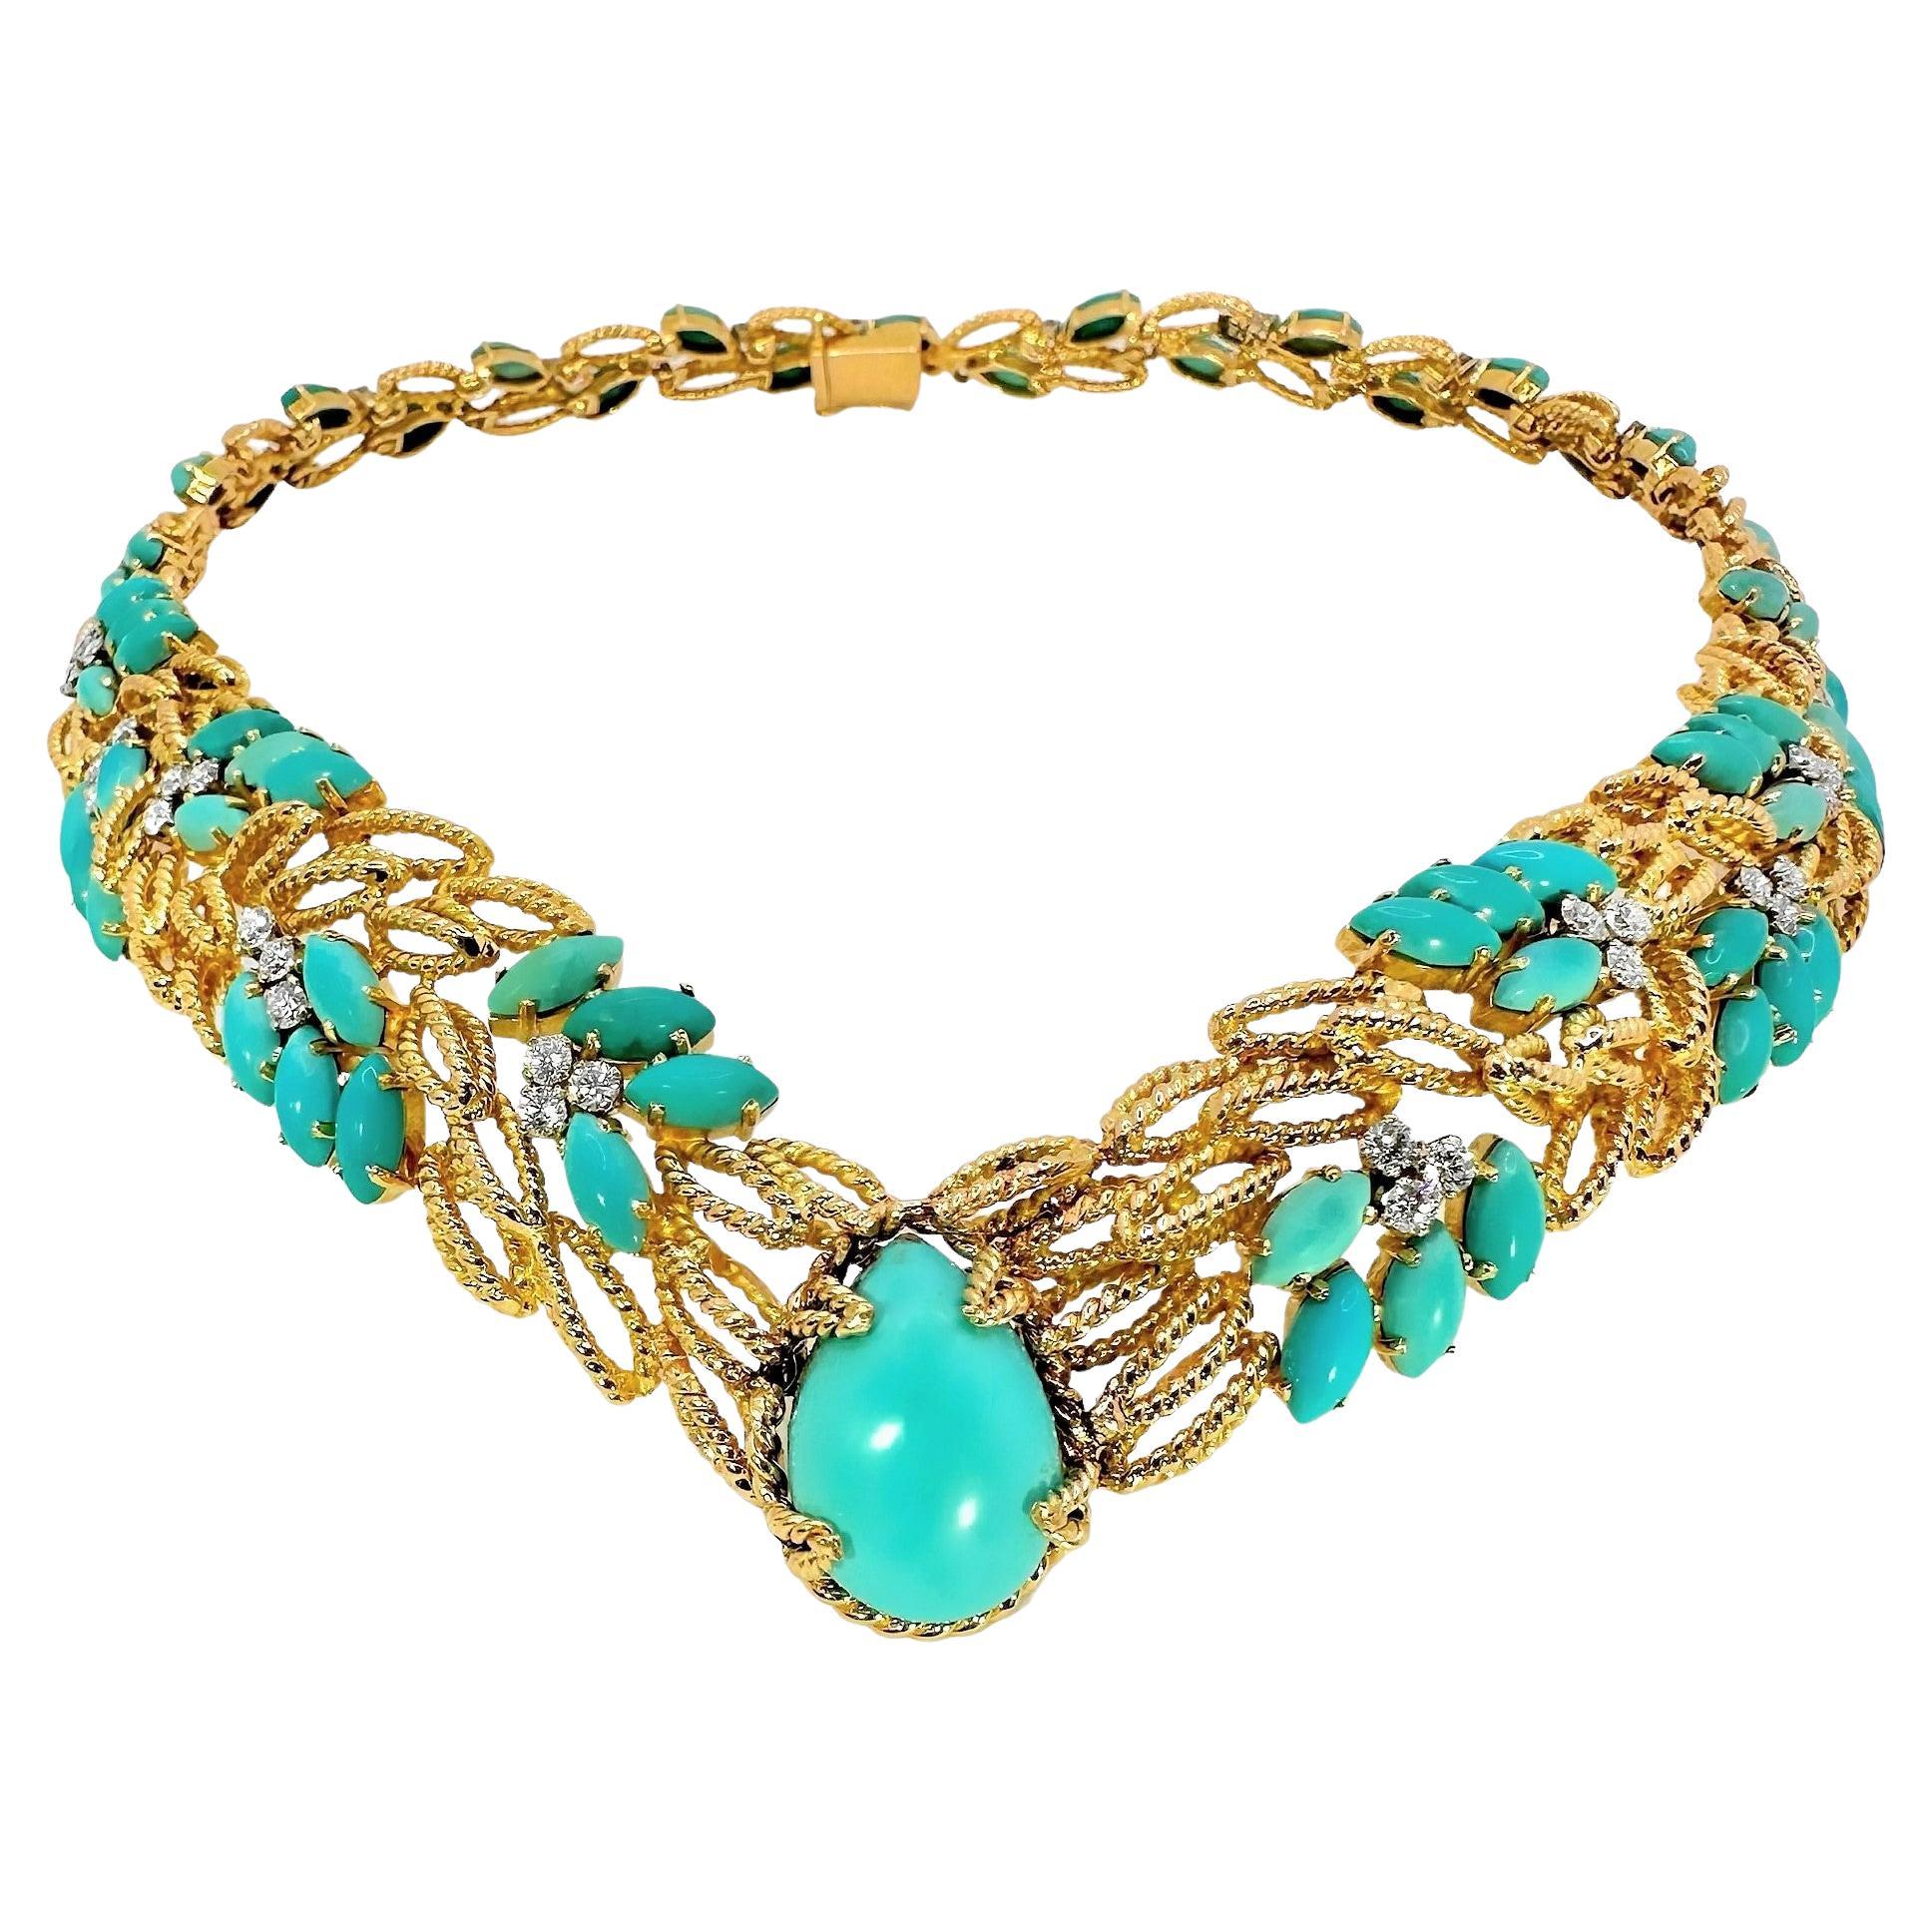 Unique and Lovely Mid-20th Century Cocktail Necklace in Turquoise and Diamonds For Sale